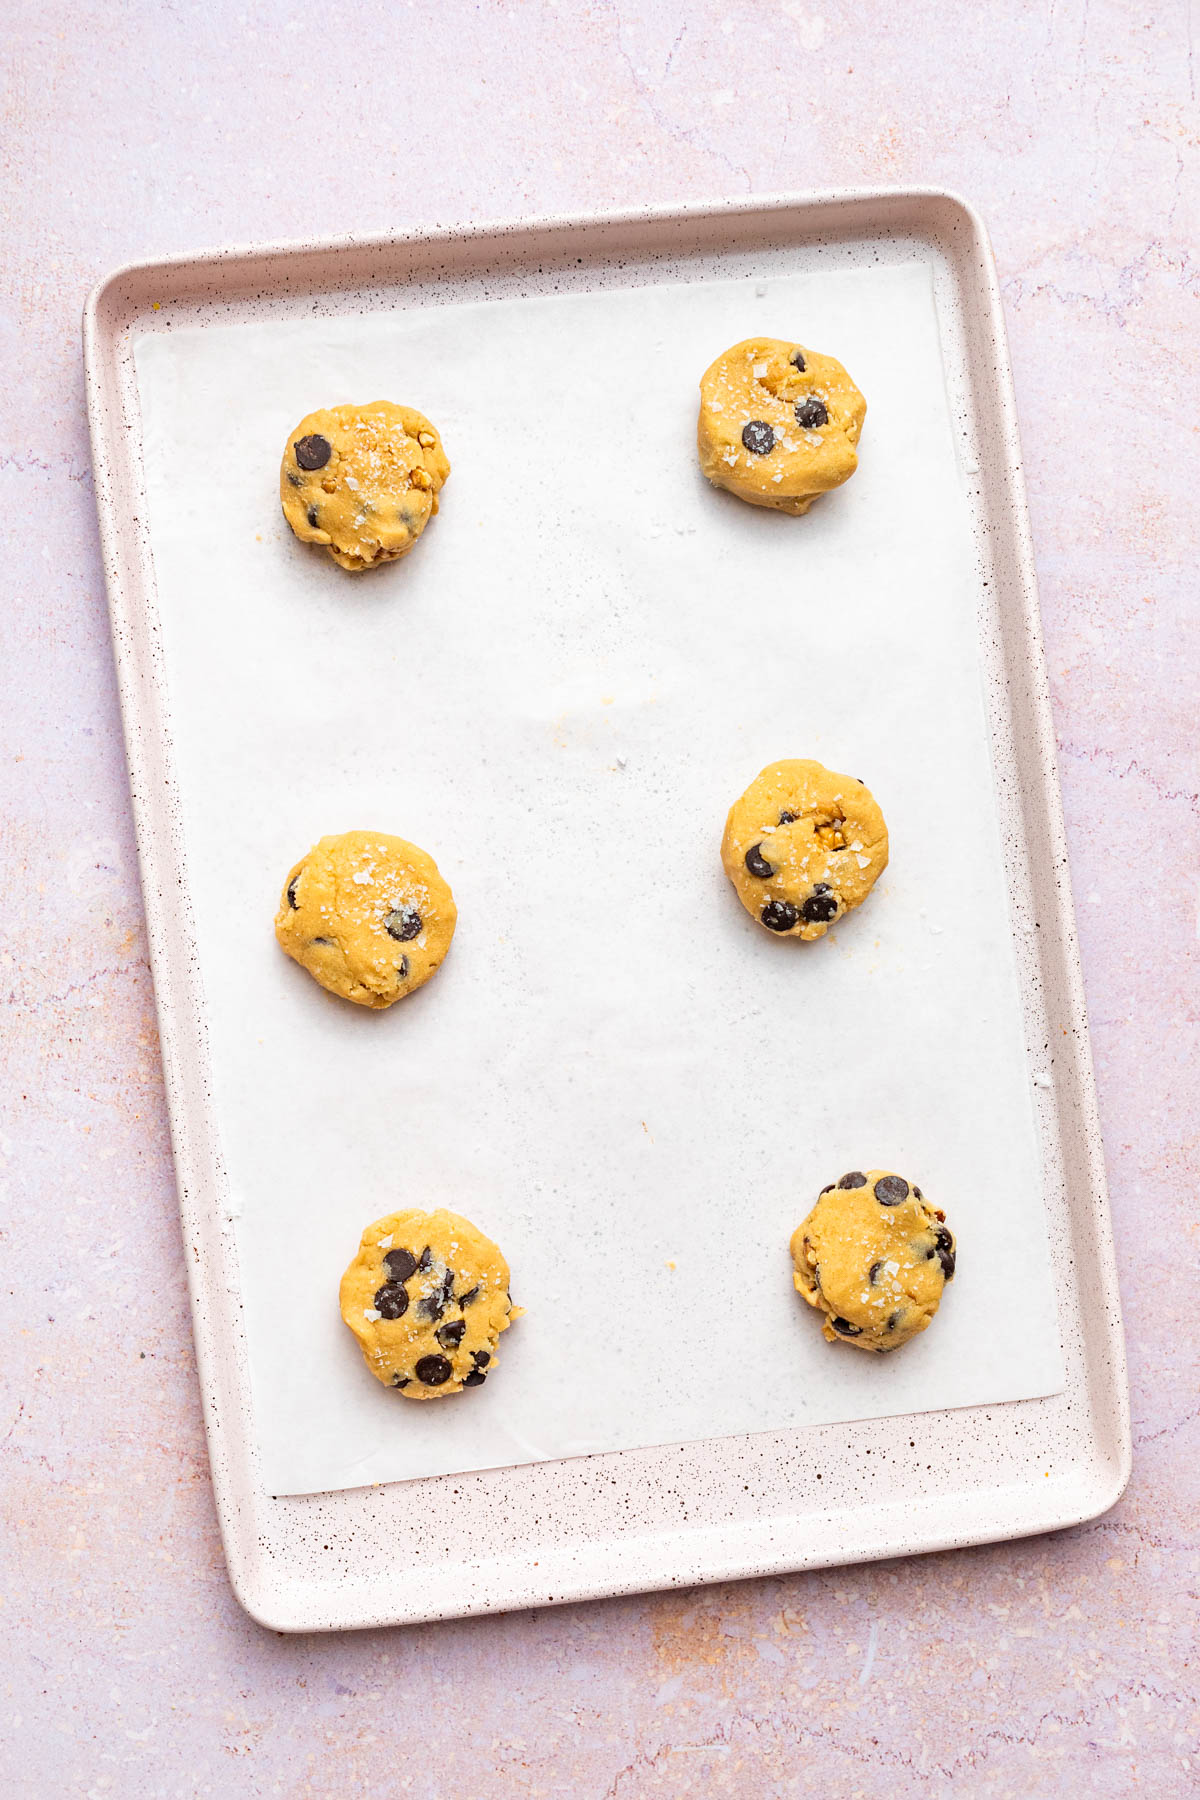 Six portions of unbaked cookie dough on a parchment paper-lined baking sheet.